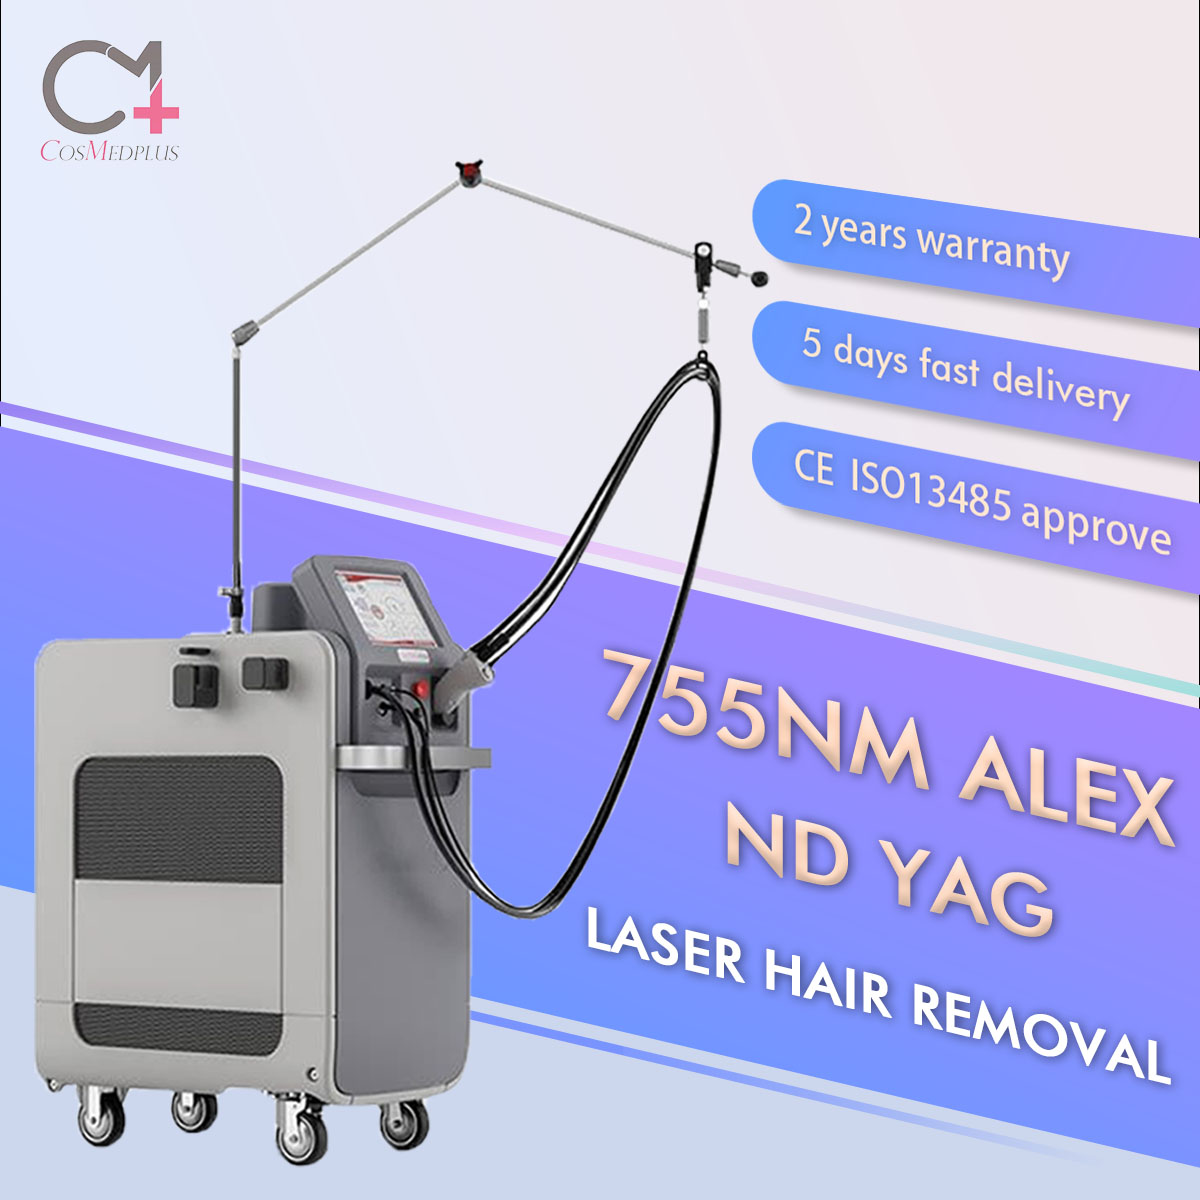 1064NM ND YAG Gentle Laser Hair Removal Machine Max Price CanDela 755NM Alexandrite Laser Featured Image